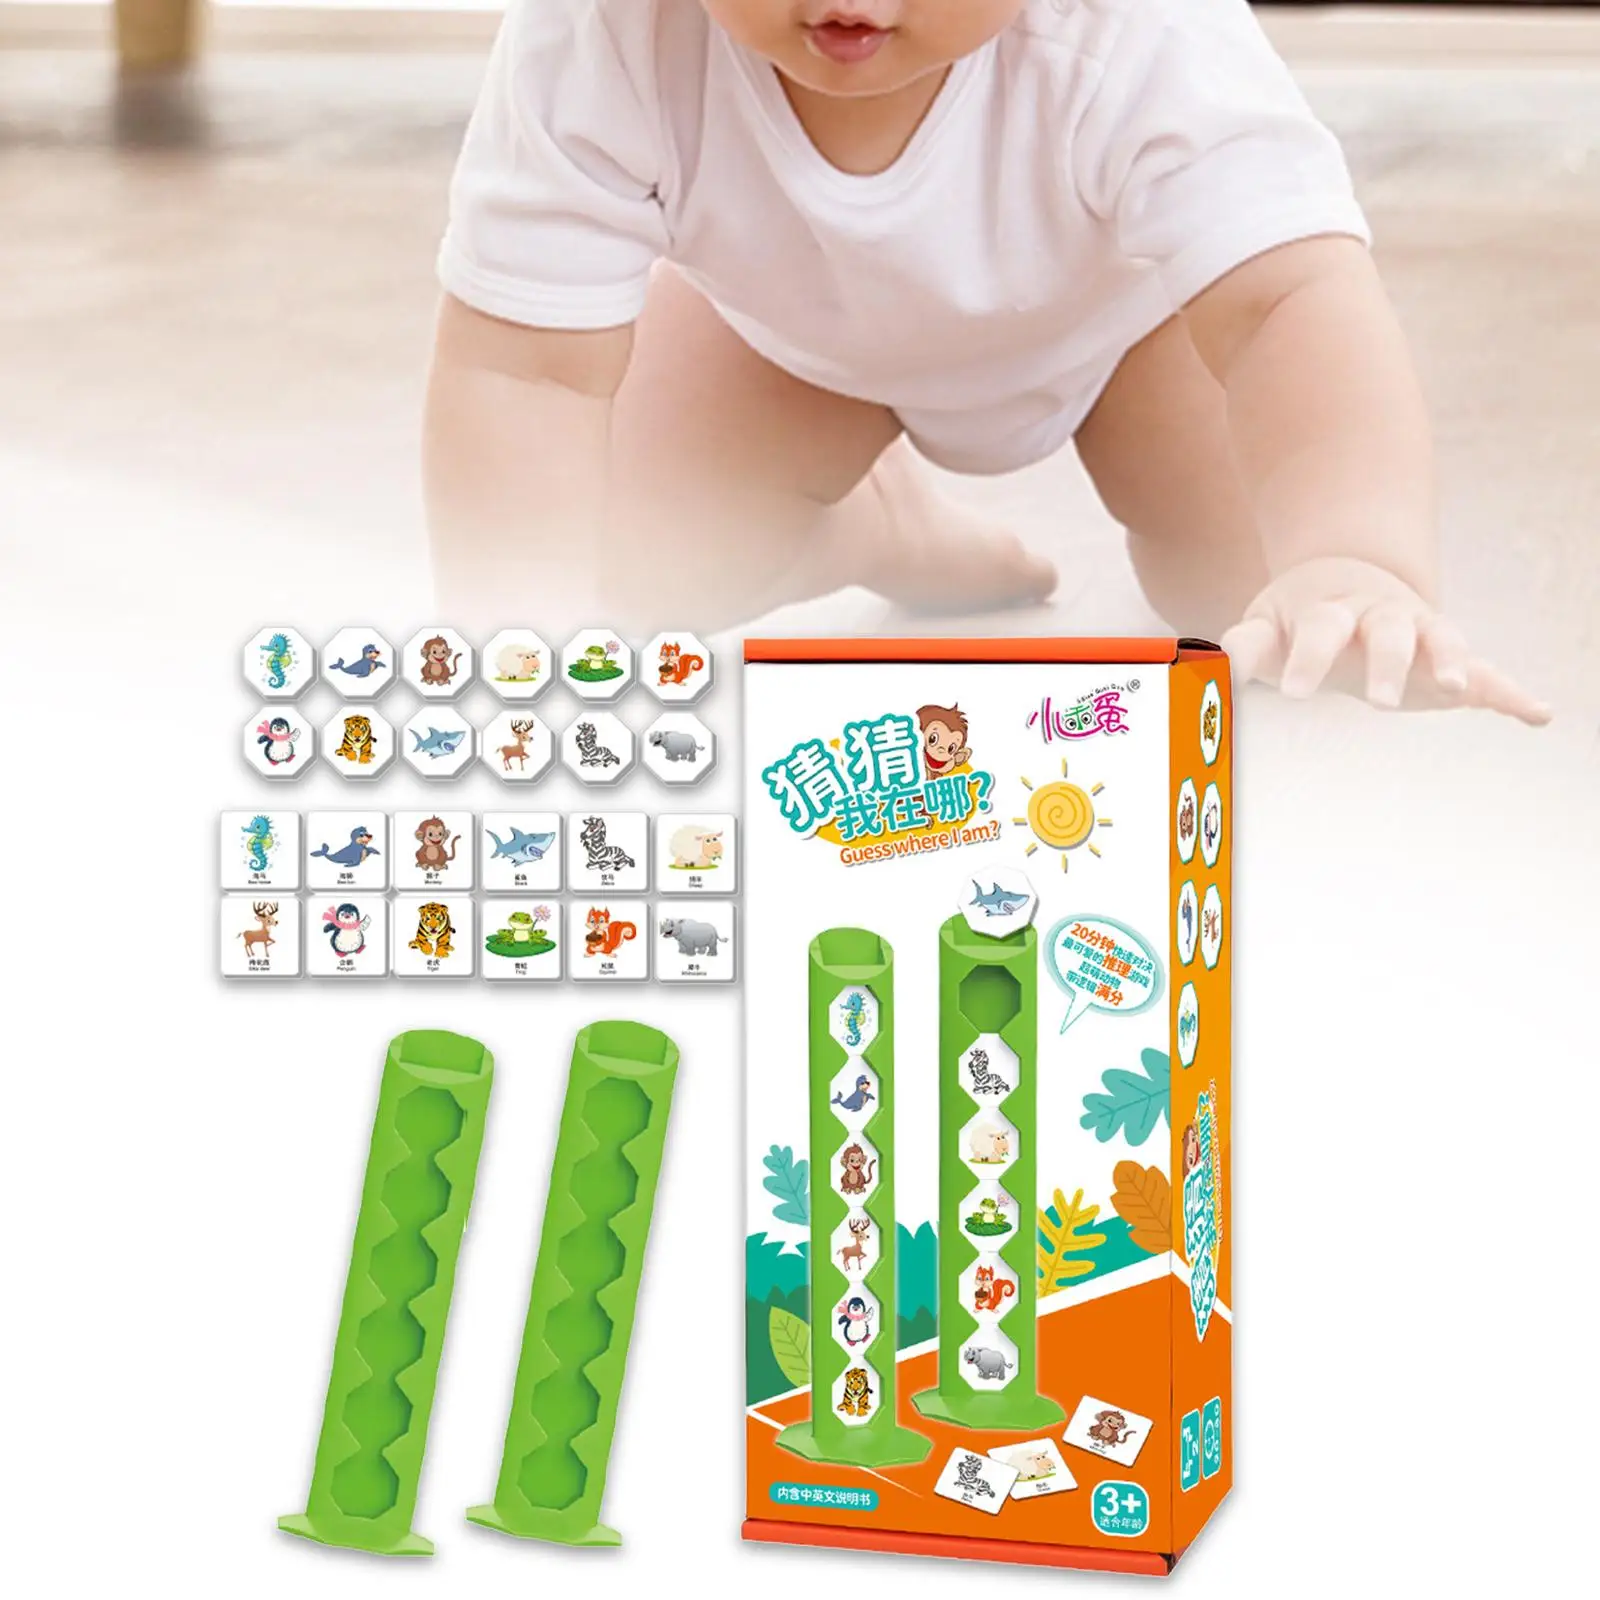 Guessing Game 2 Players Funny Battle Game for Party Prop Family Game Boys